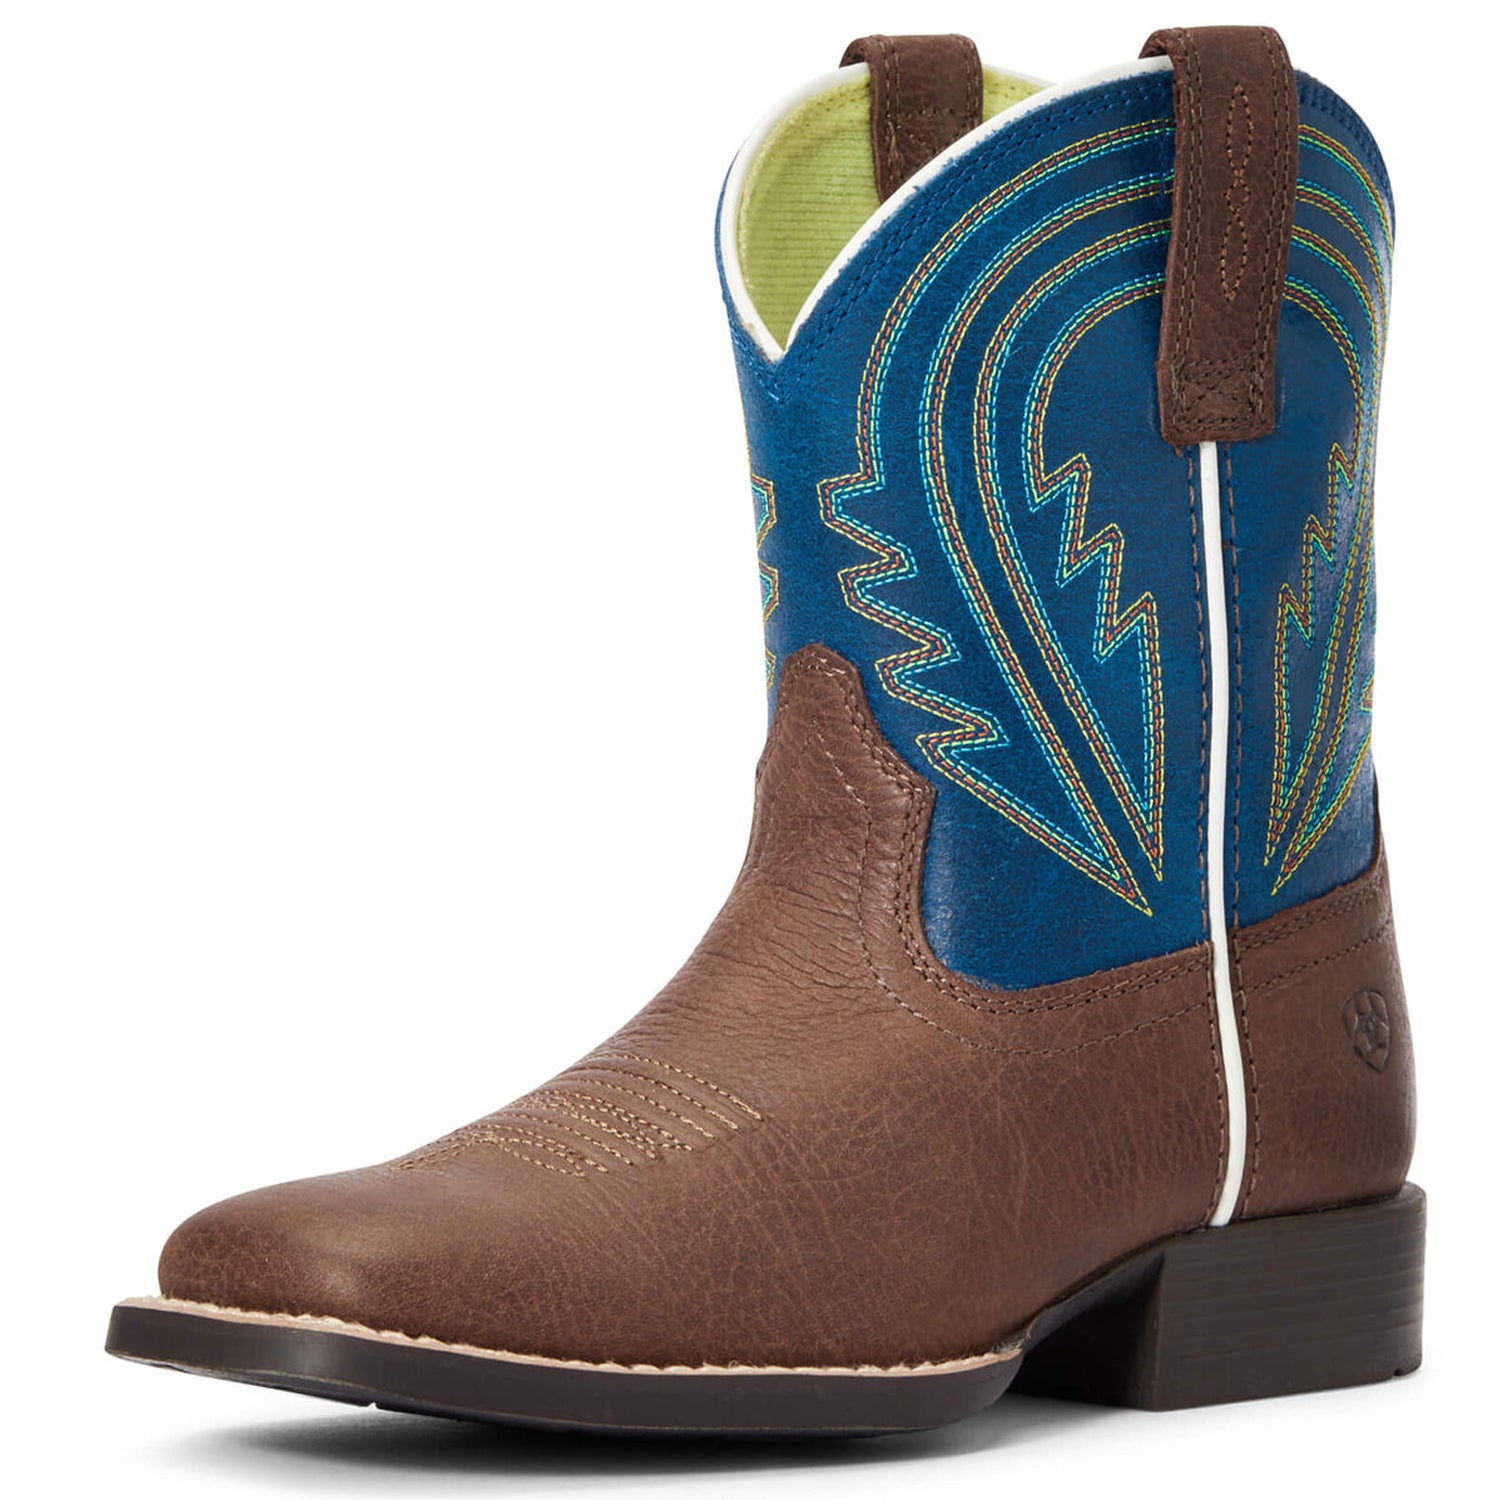 Kids' Ariat Lil' Hoss Western Boot in Chocolate/Navy